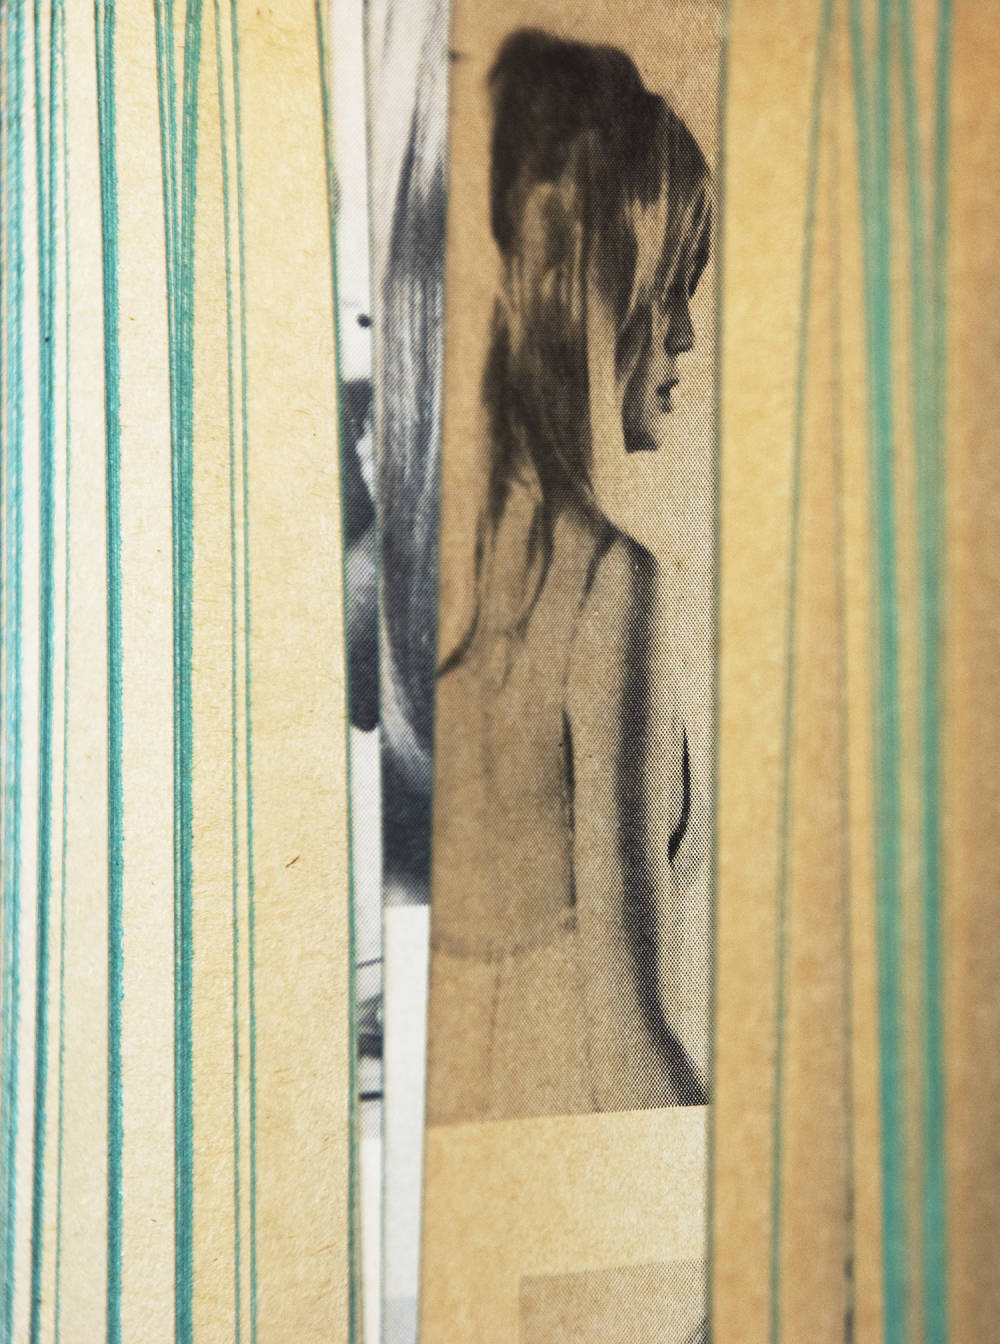 Photograph peering into an open book with the edges of the book's paper creating thin vertical stripes resulting in an mostly abstract image of color and shape. Visible is a cropped image of a woman with her back turned. All other strips are fairly unrecognizable. The dominant color in the image is the yellowed paper and the green dyed paper edges.